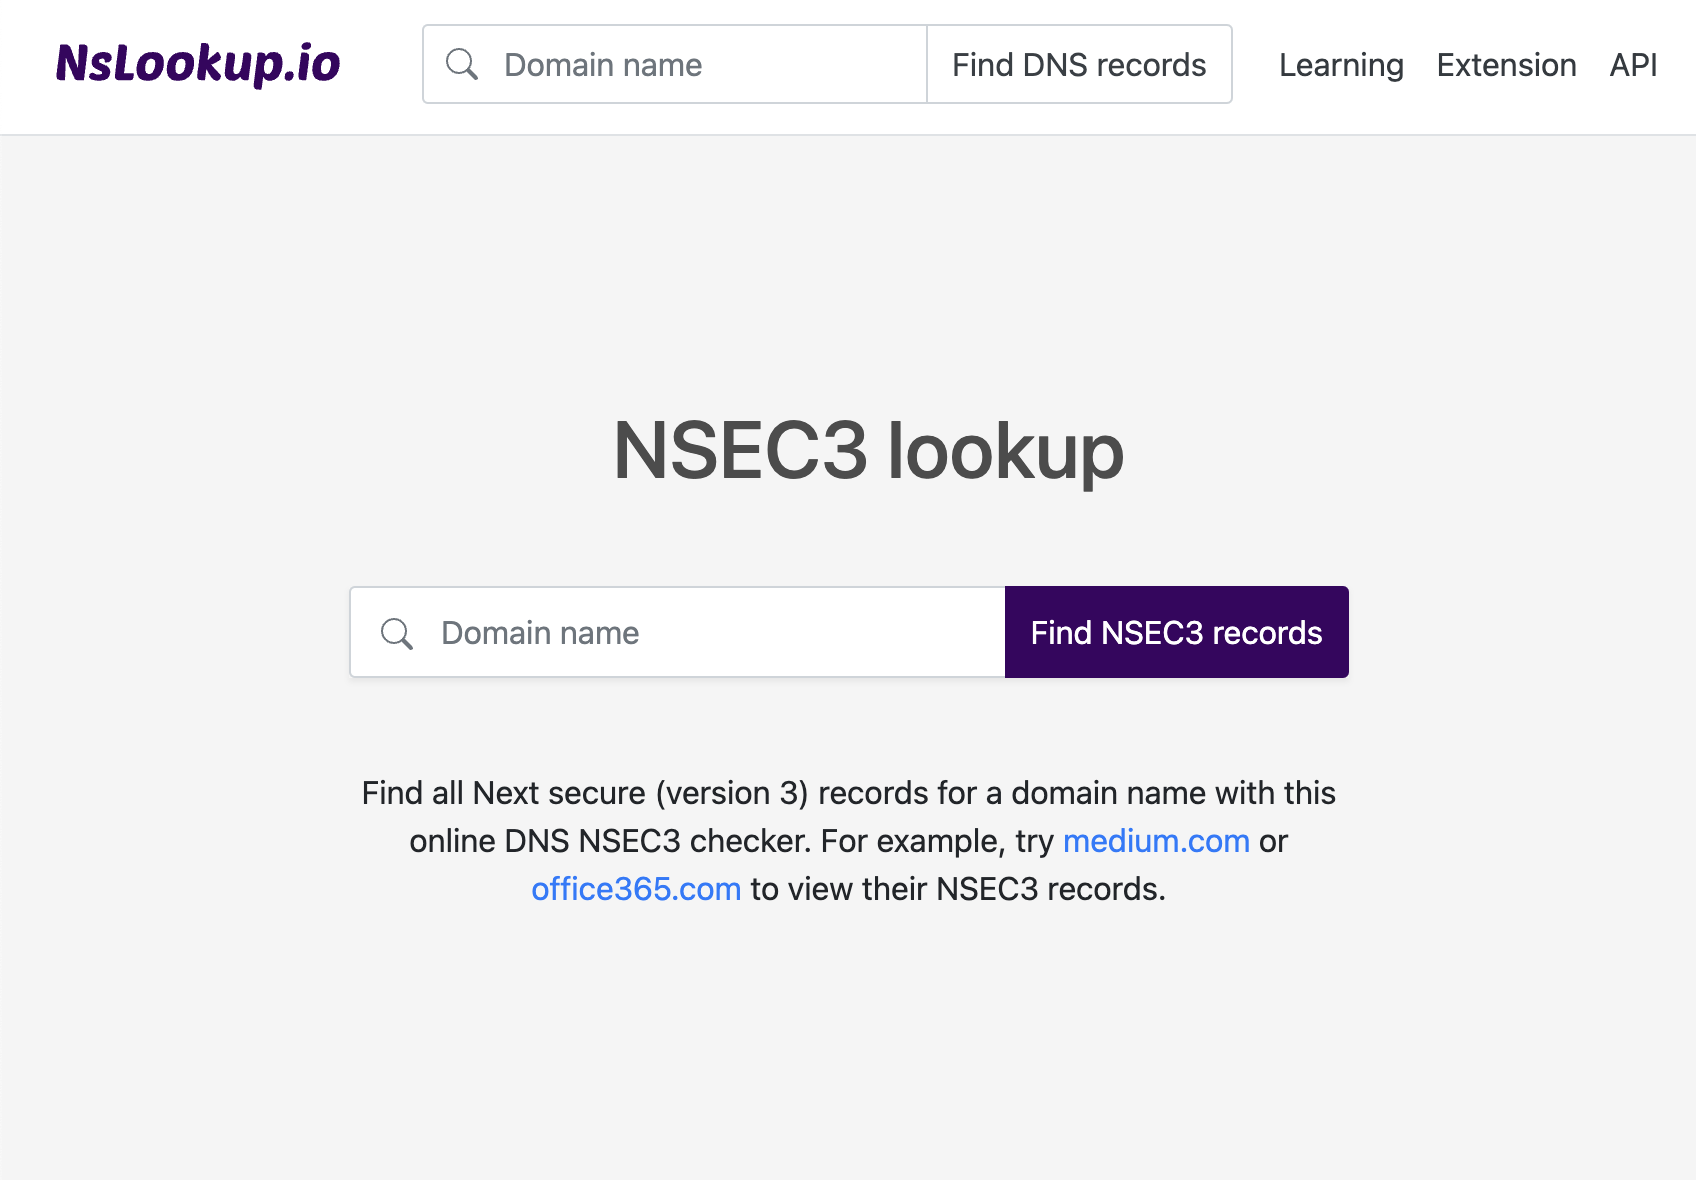 Open the NSEC3 lookup tool